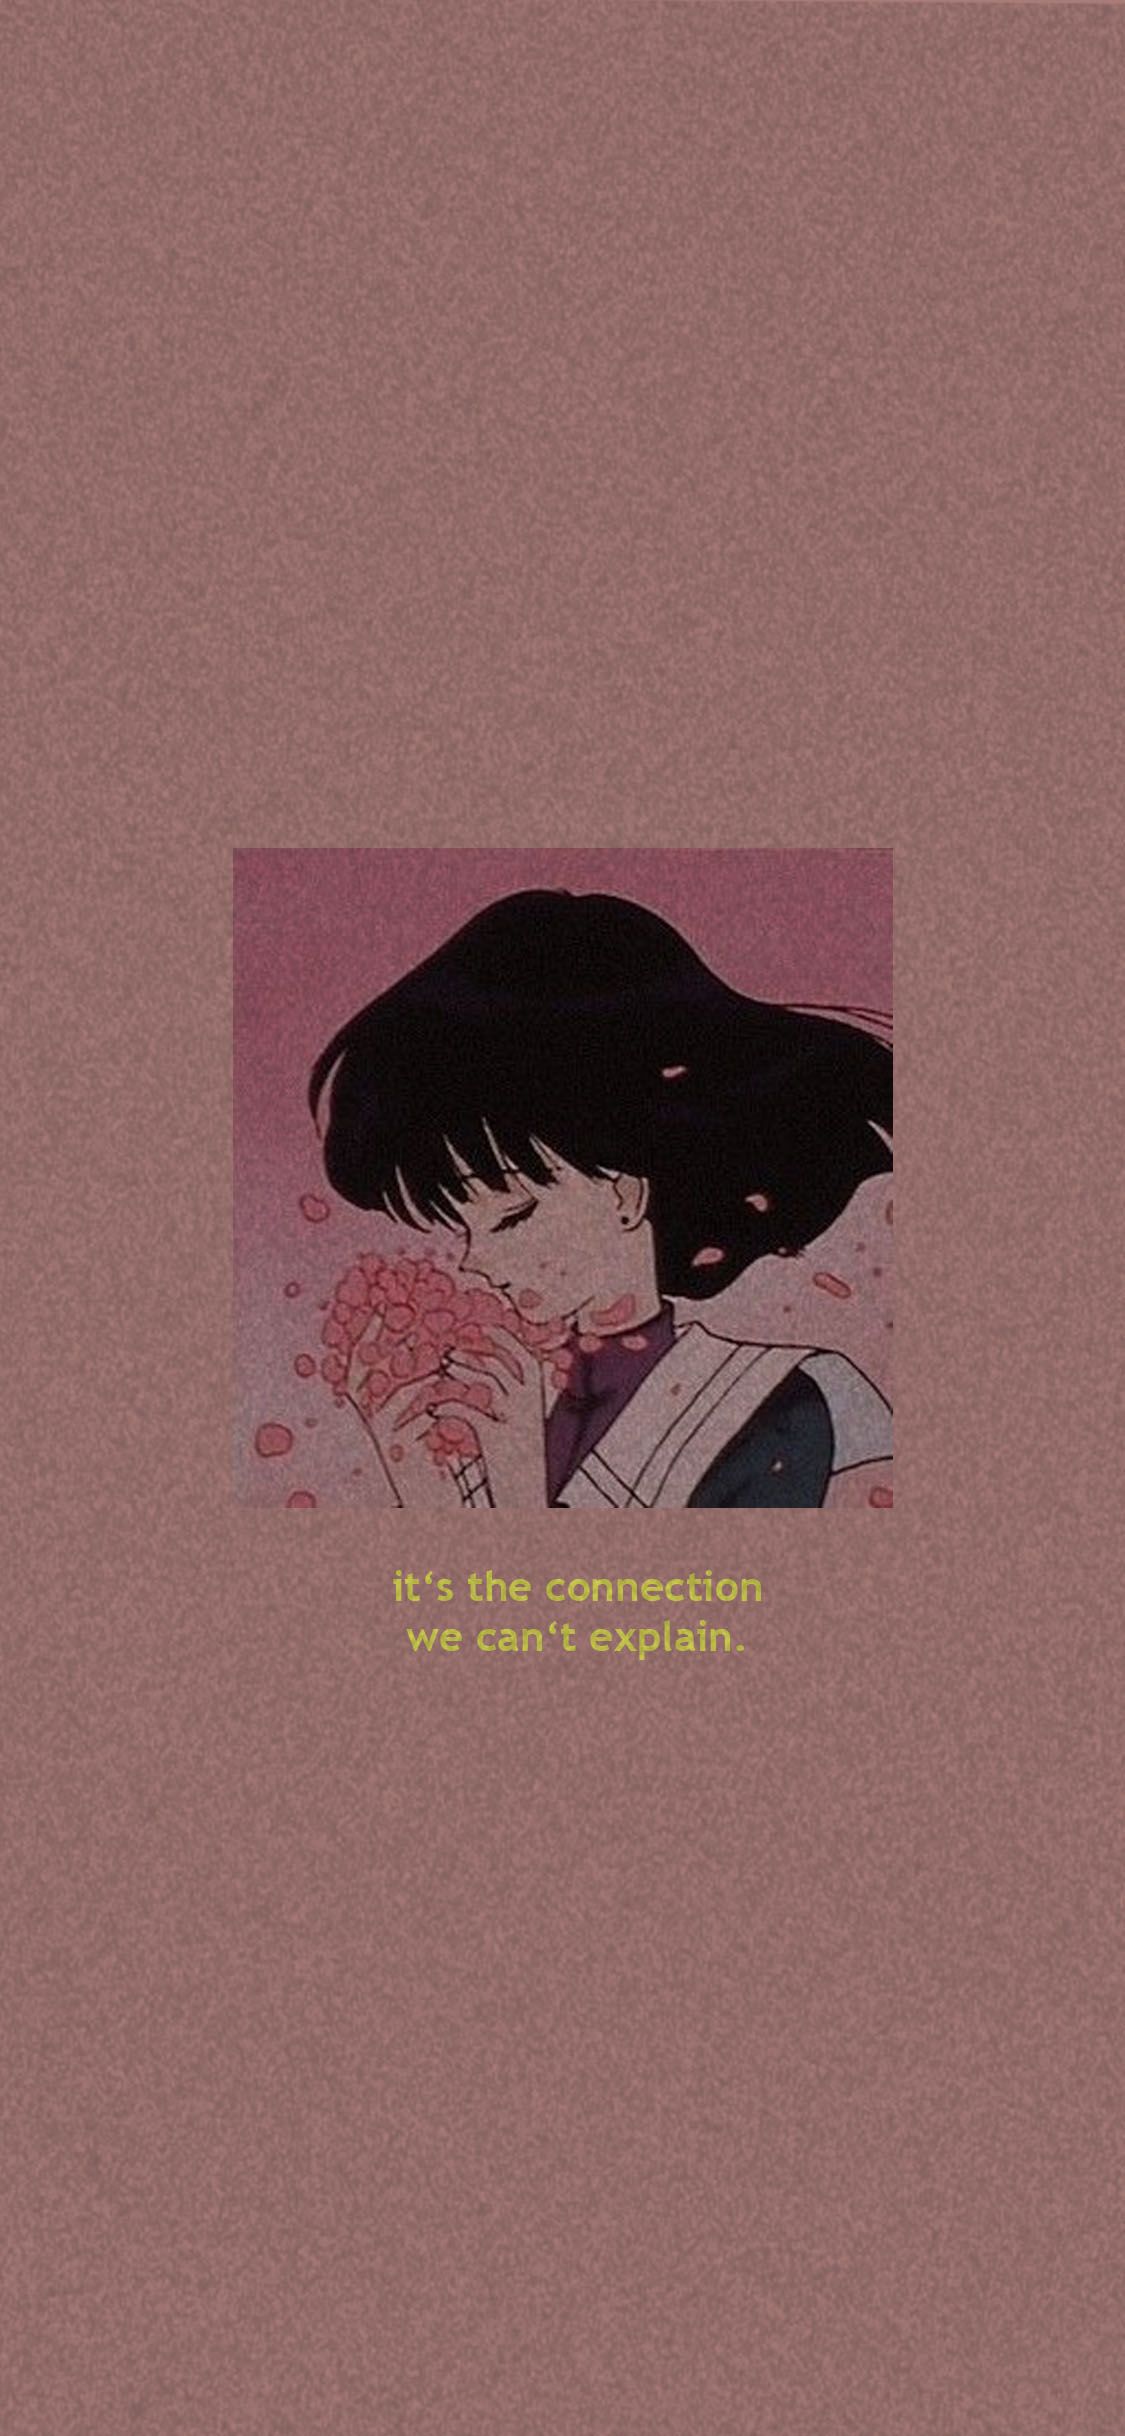 IPhone wallpaper of a girl smelling flowers with a quote - Anime, 90s, 90s anime